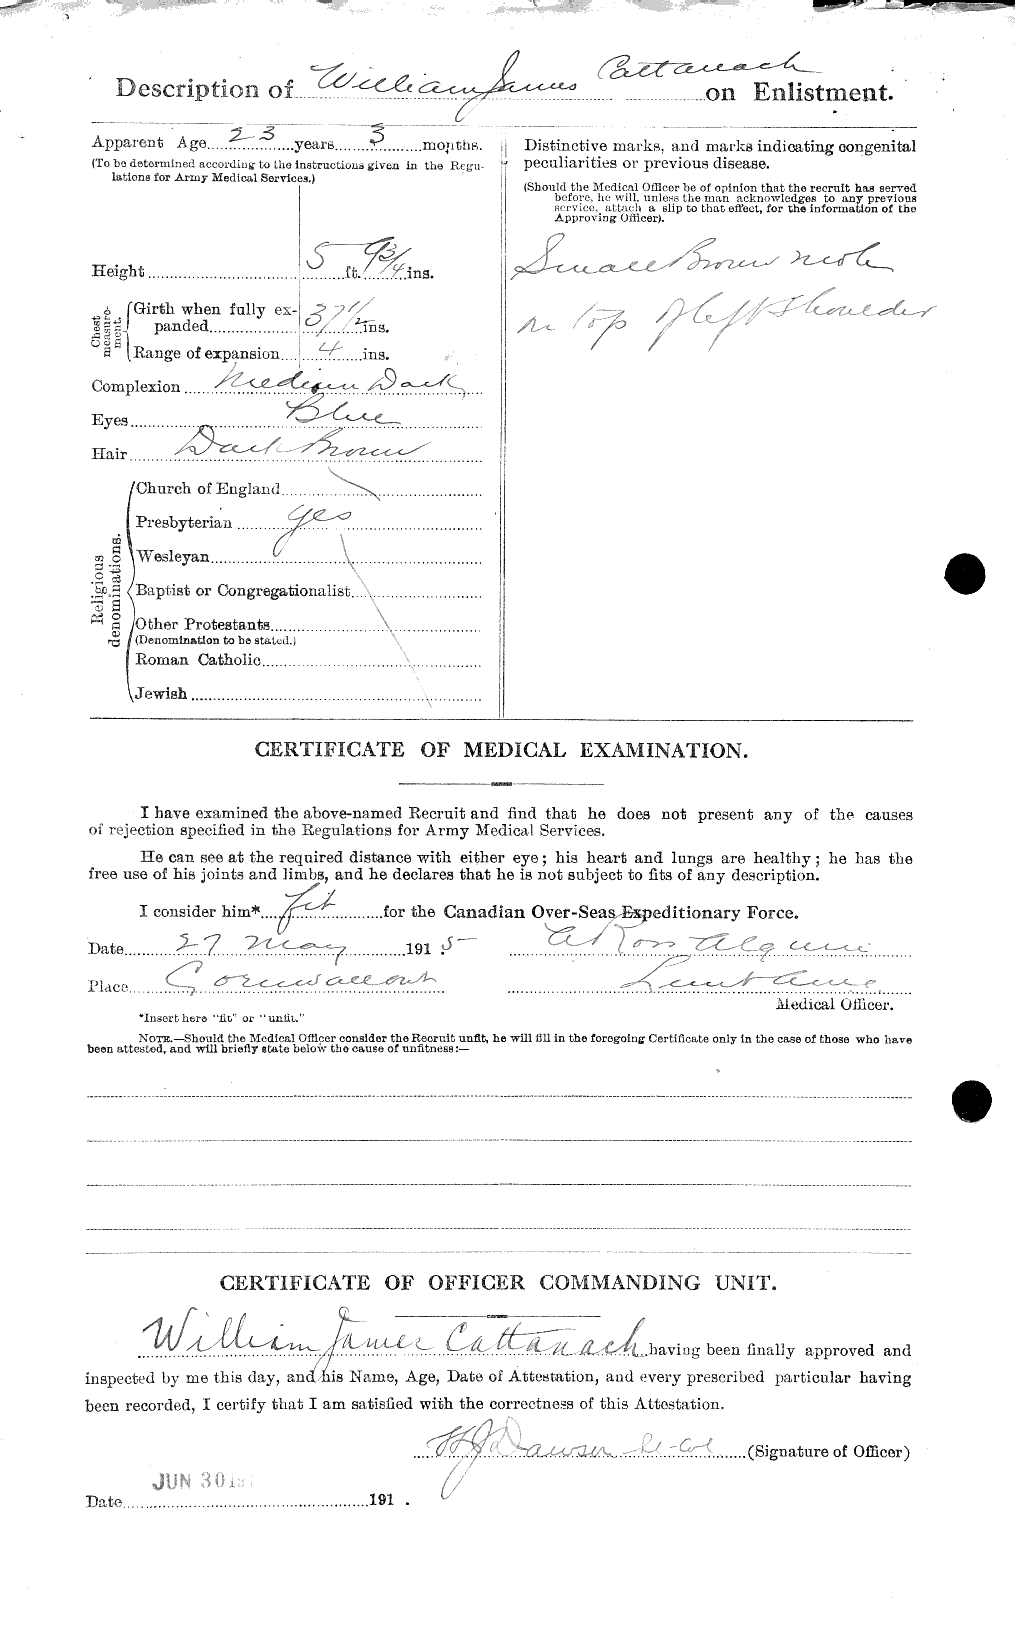 Personnel Records of the First World War - CEF 013313b